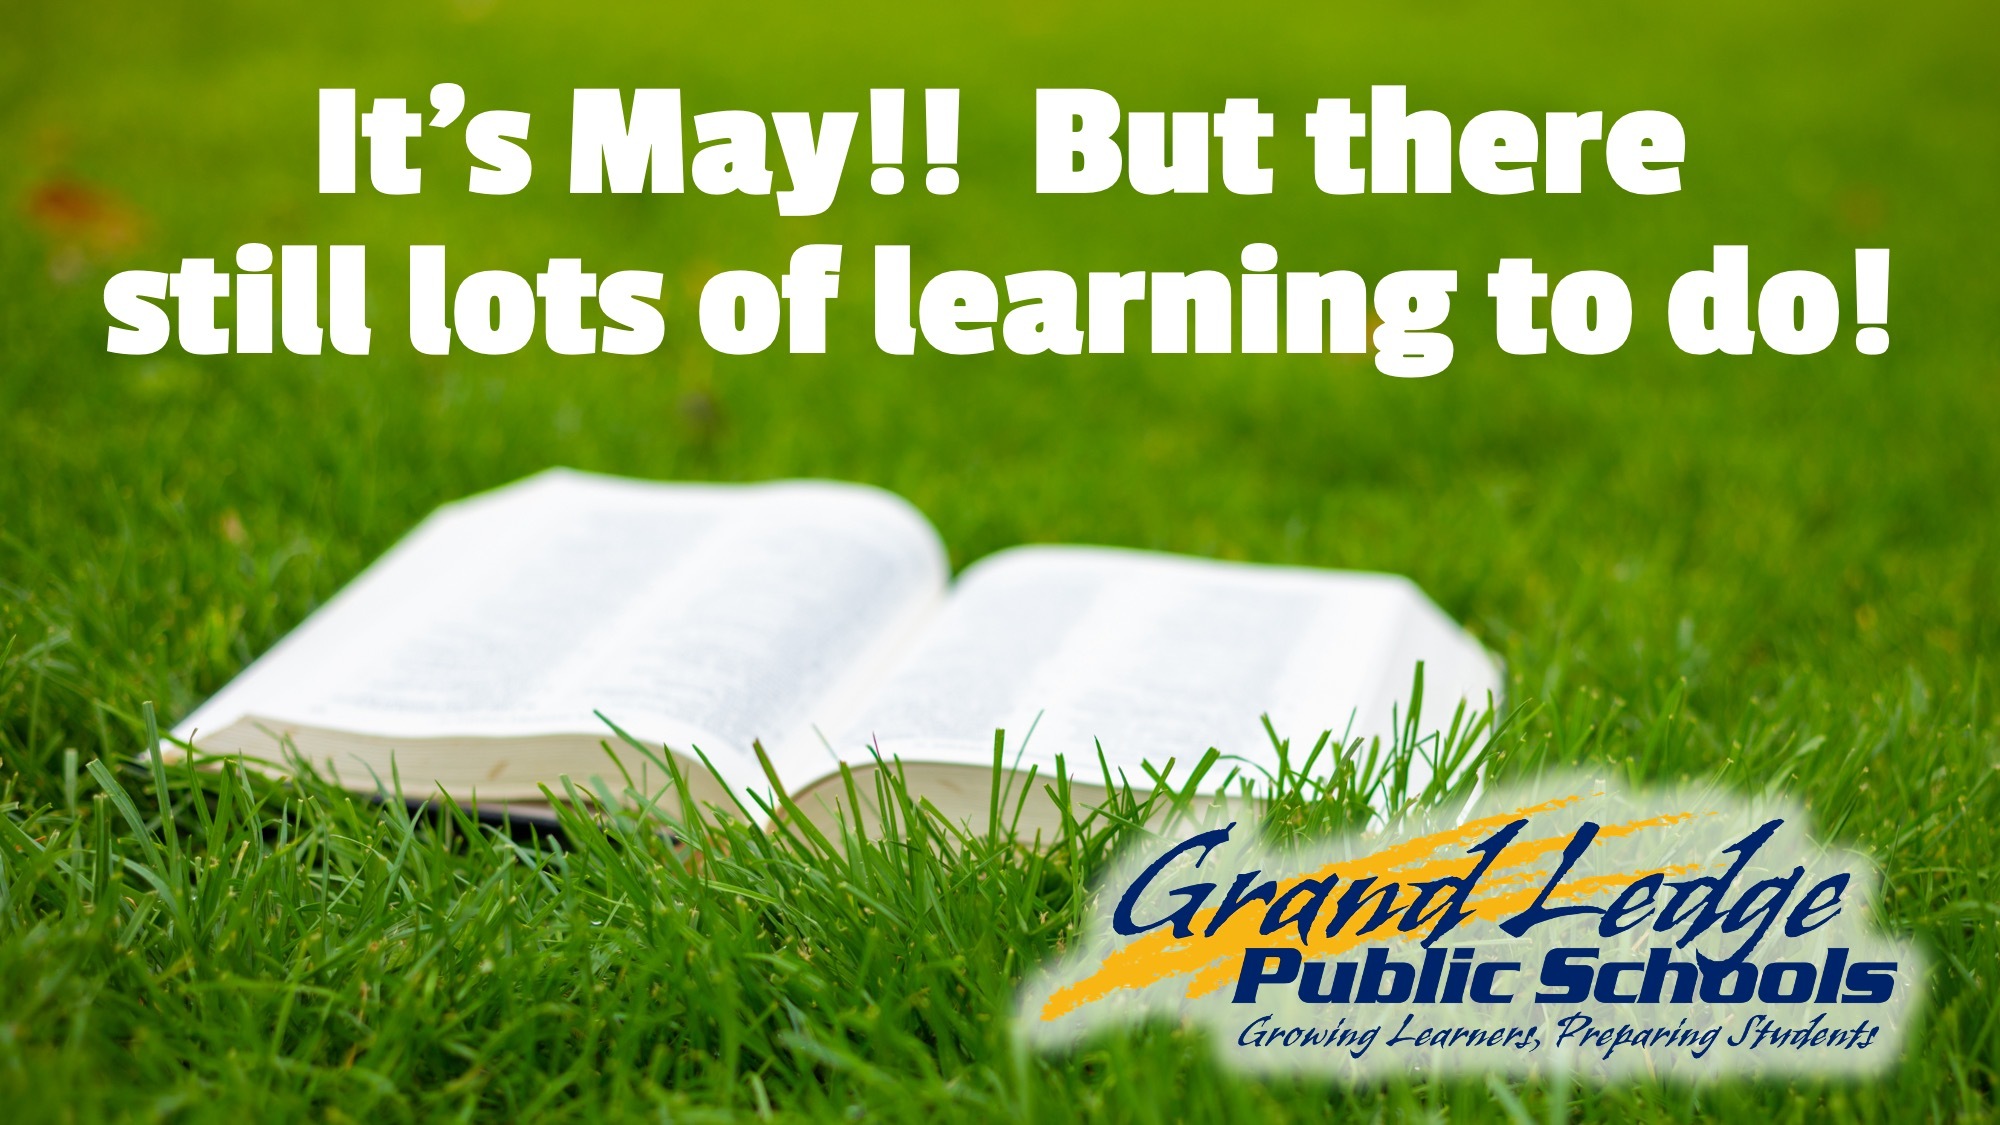 It's May!! But there still lots of learning to do!